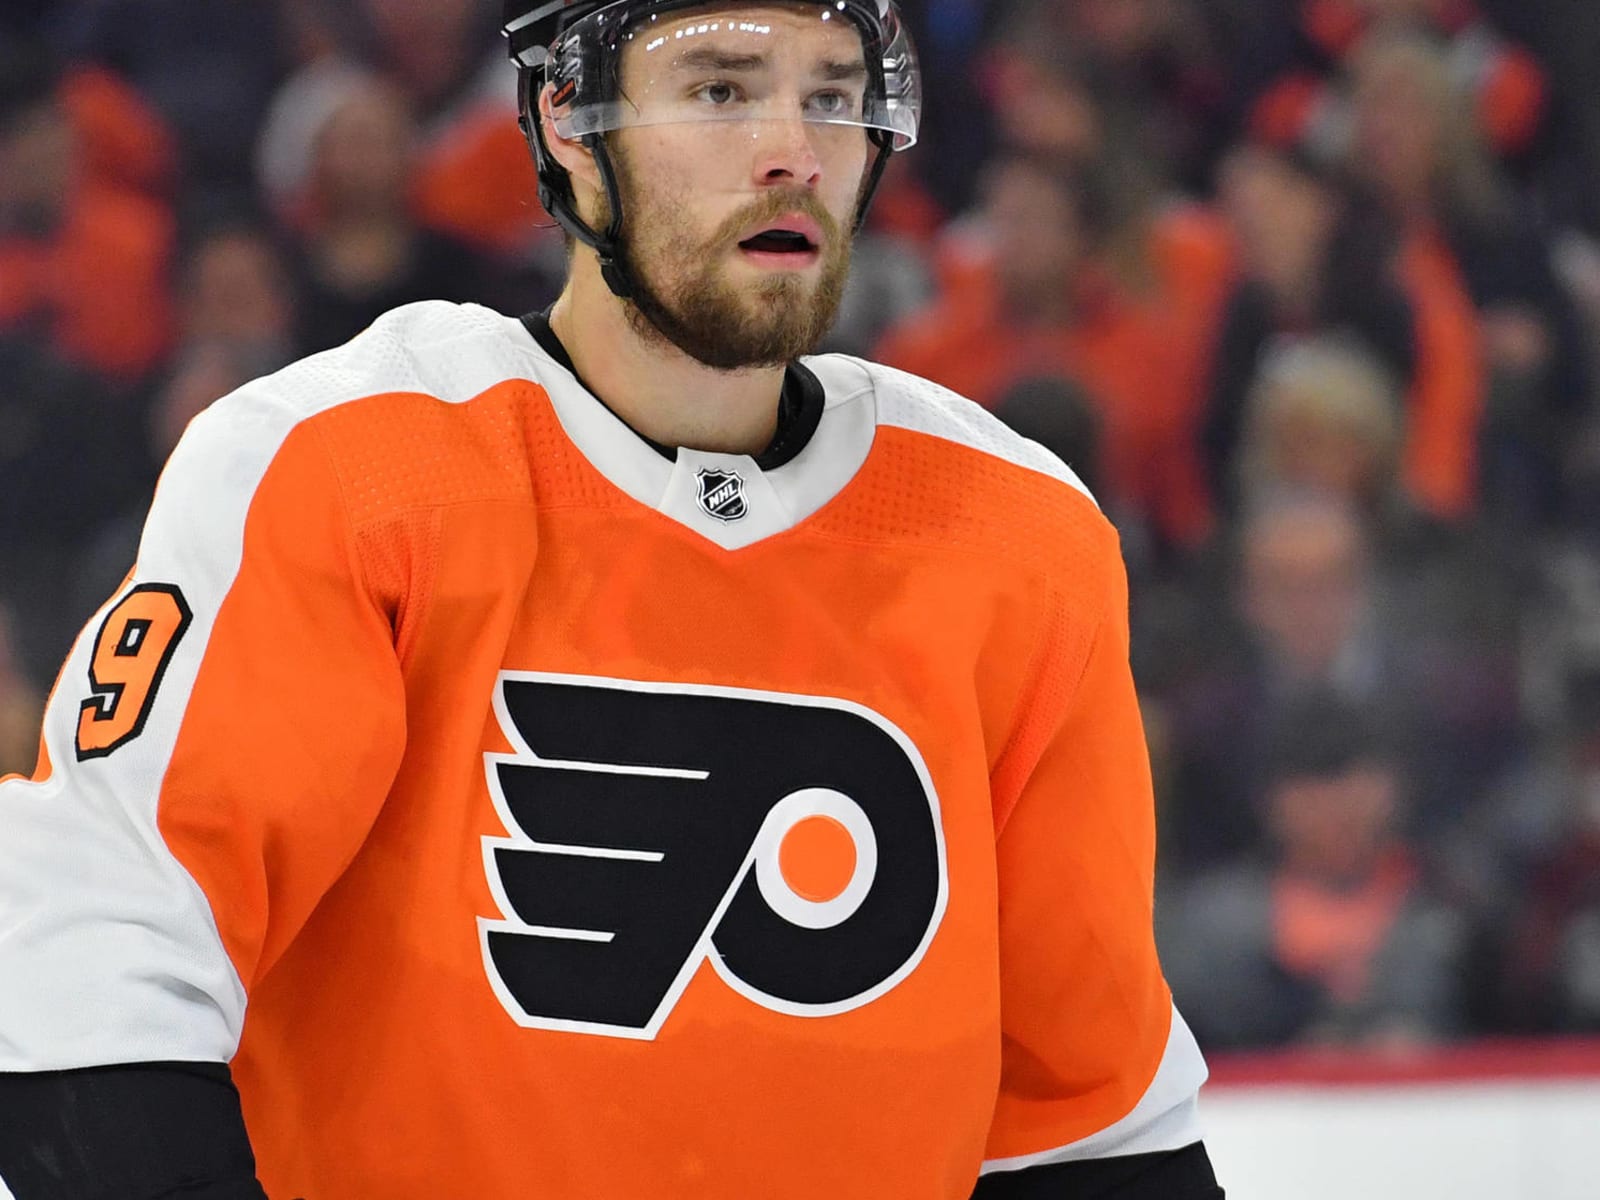 How to get Penguins, Flyers NHL Reverse Retro jerseys: Where to